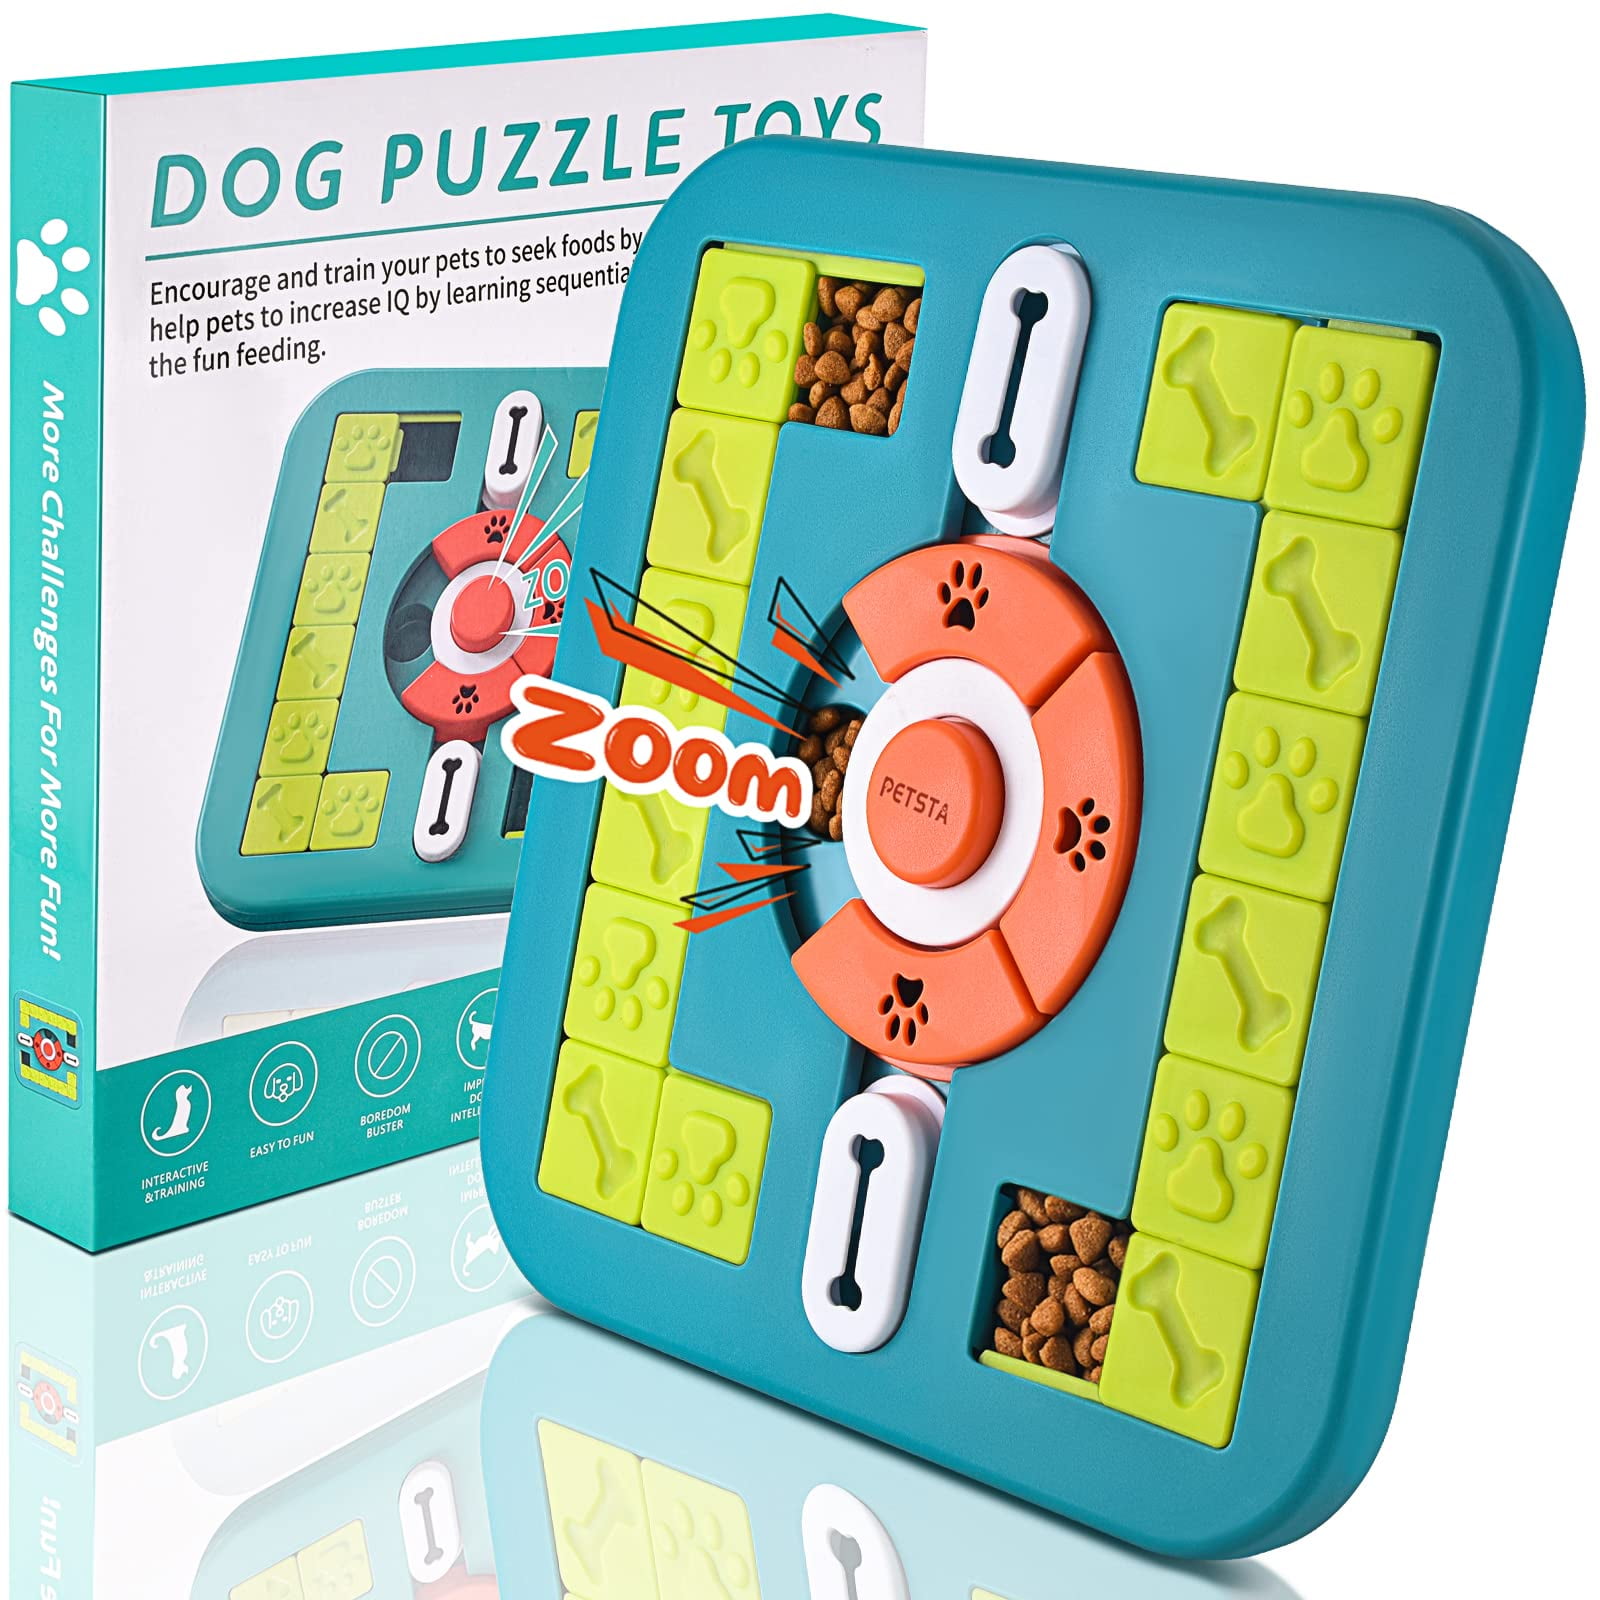 Dog Puzzle Toys, Dog Puzzles for Smart Dogs, Puppy Puzzle Toys, Dog  Enrichment Toys Dog Mentally Stimulation Toys for Training, Dog Treat Chew  Toy Gifts for Puppies, Cats, Small, Medium, Large Dogs 